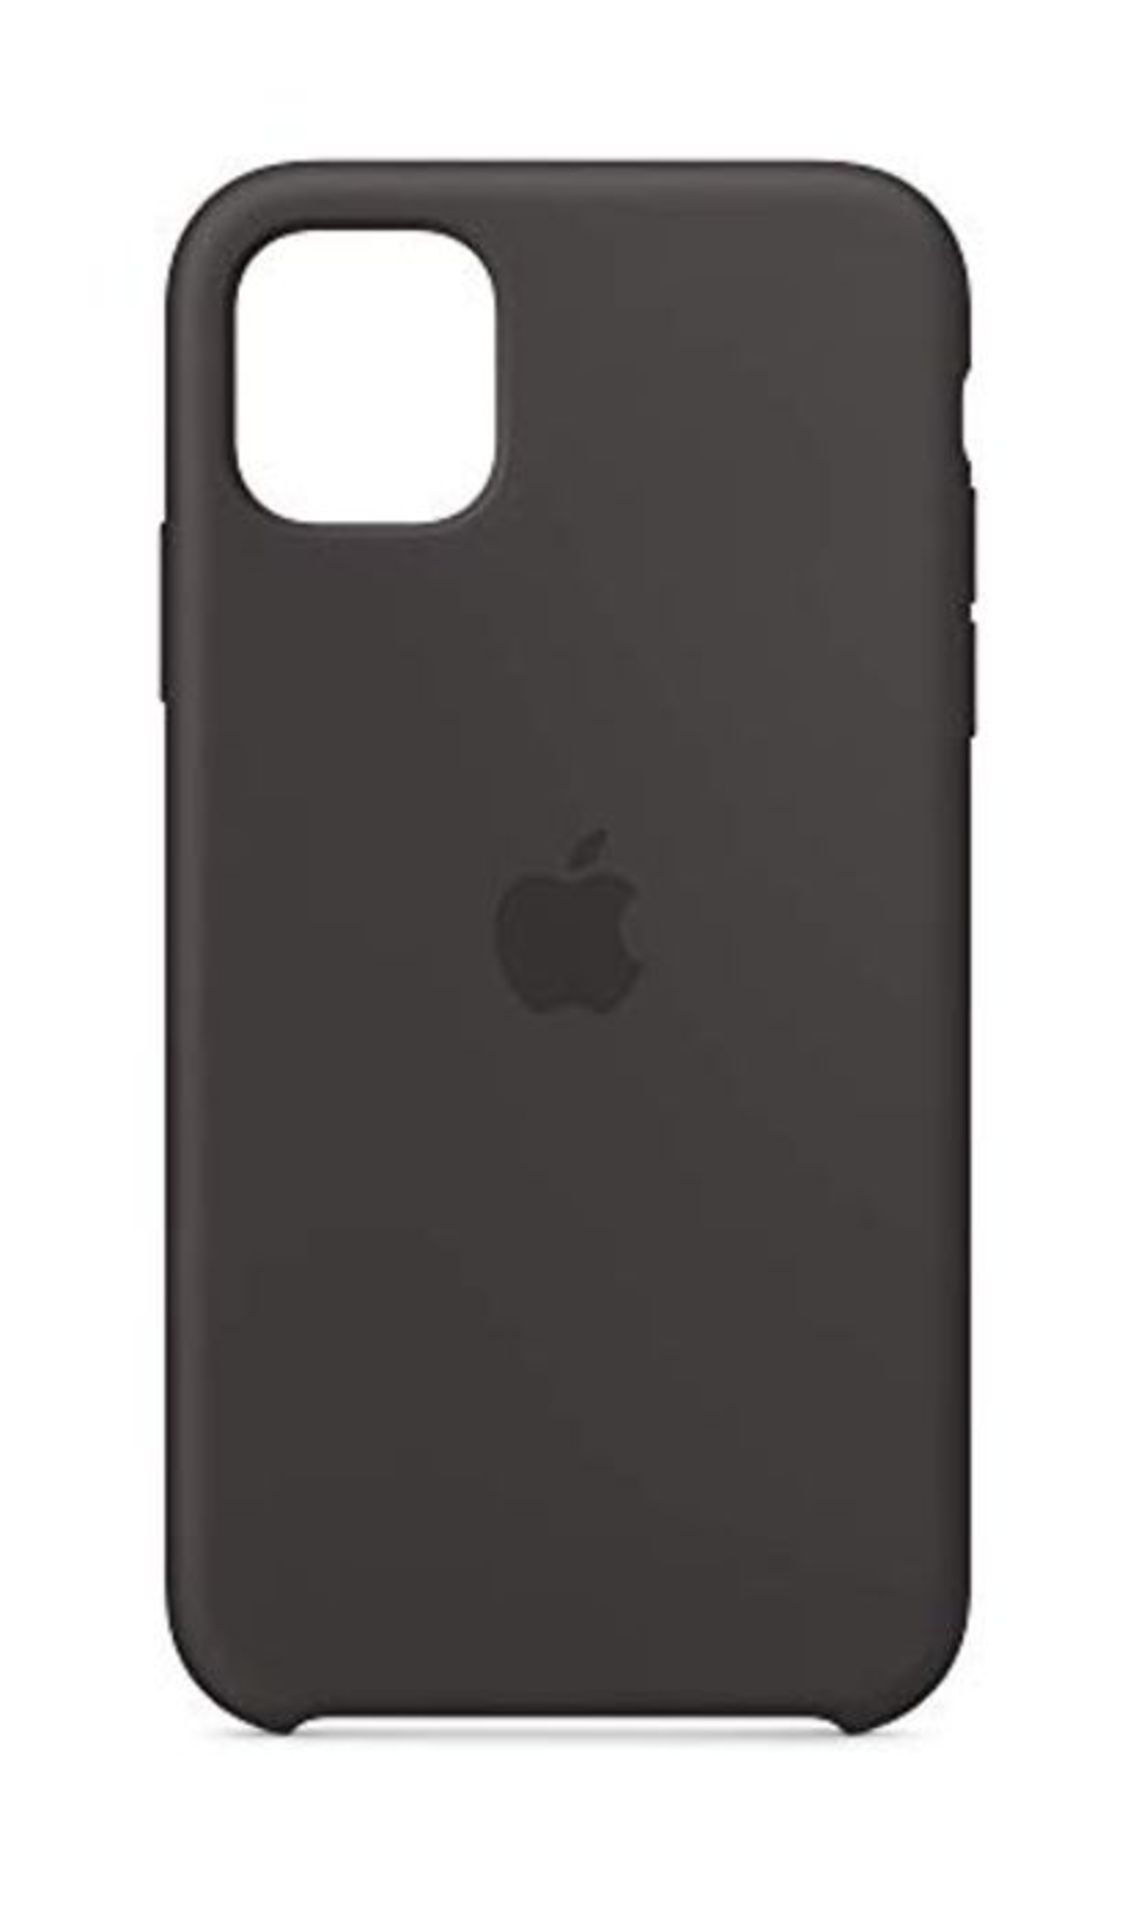 Apple Silicone Case (for iPhone 11) - Black - 6.06 inches